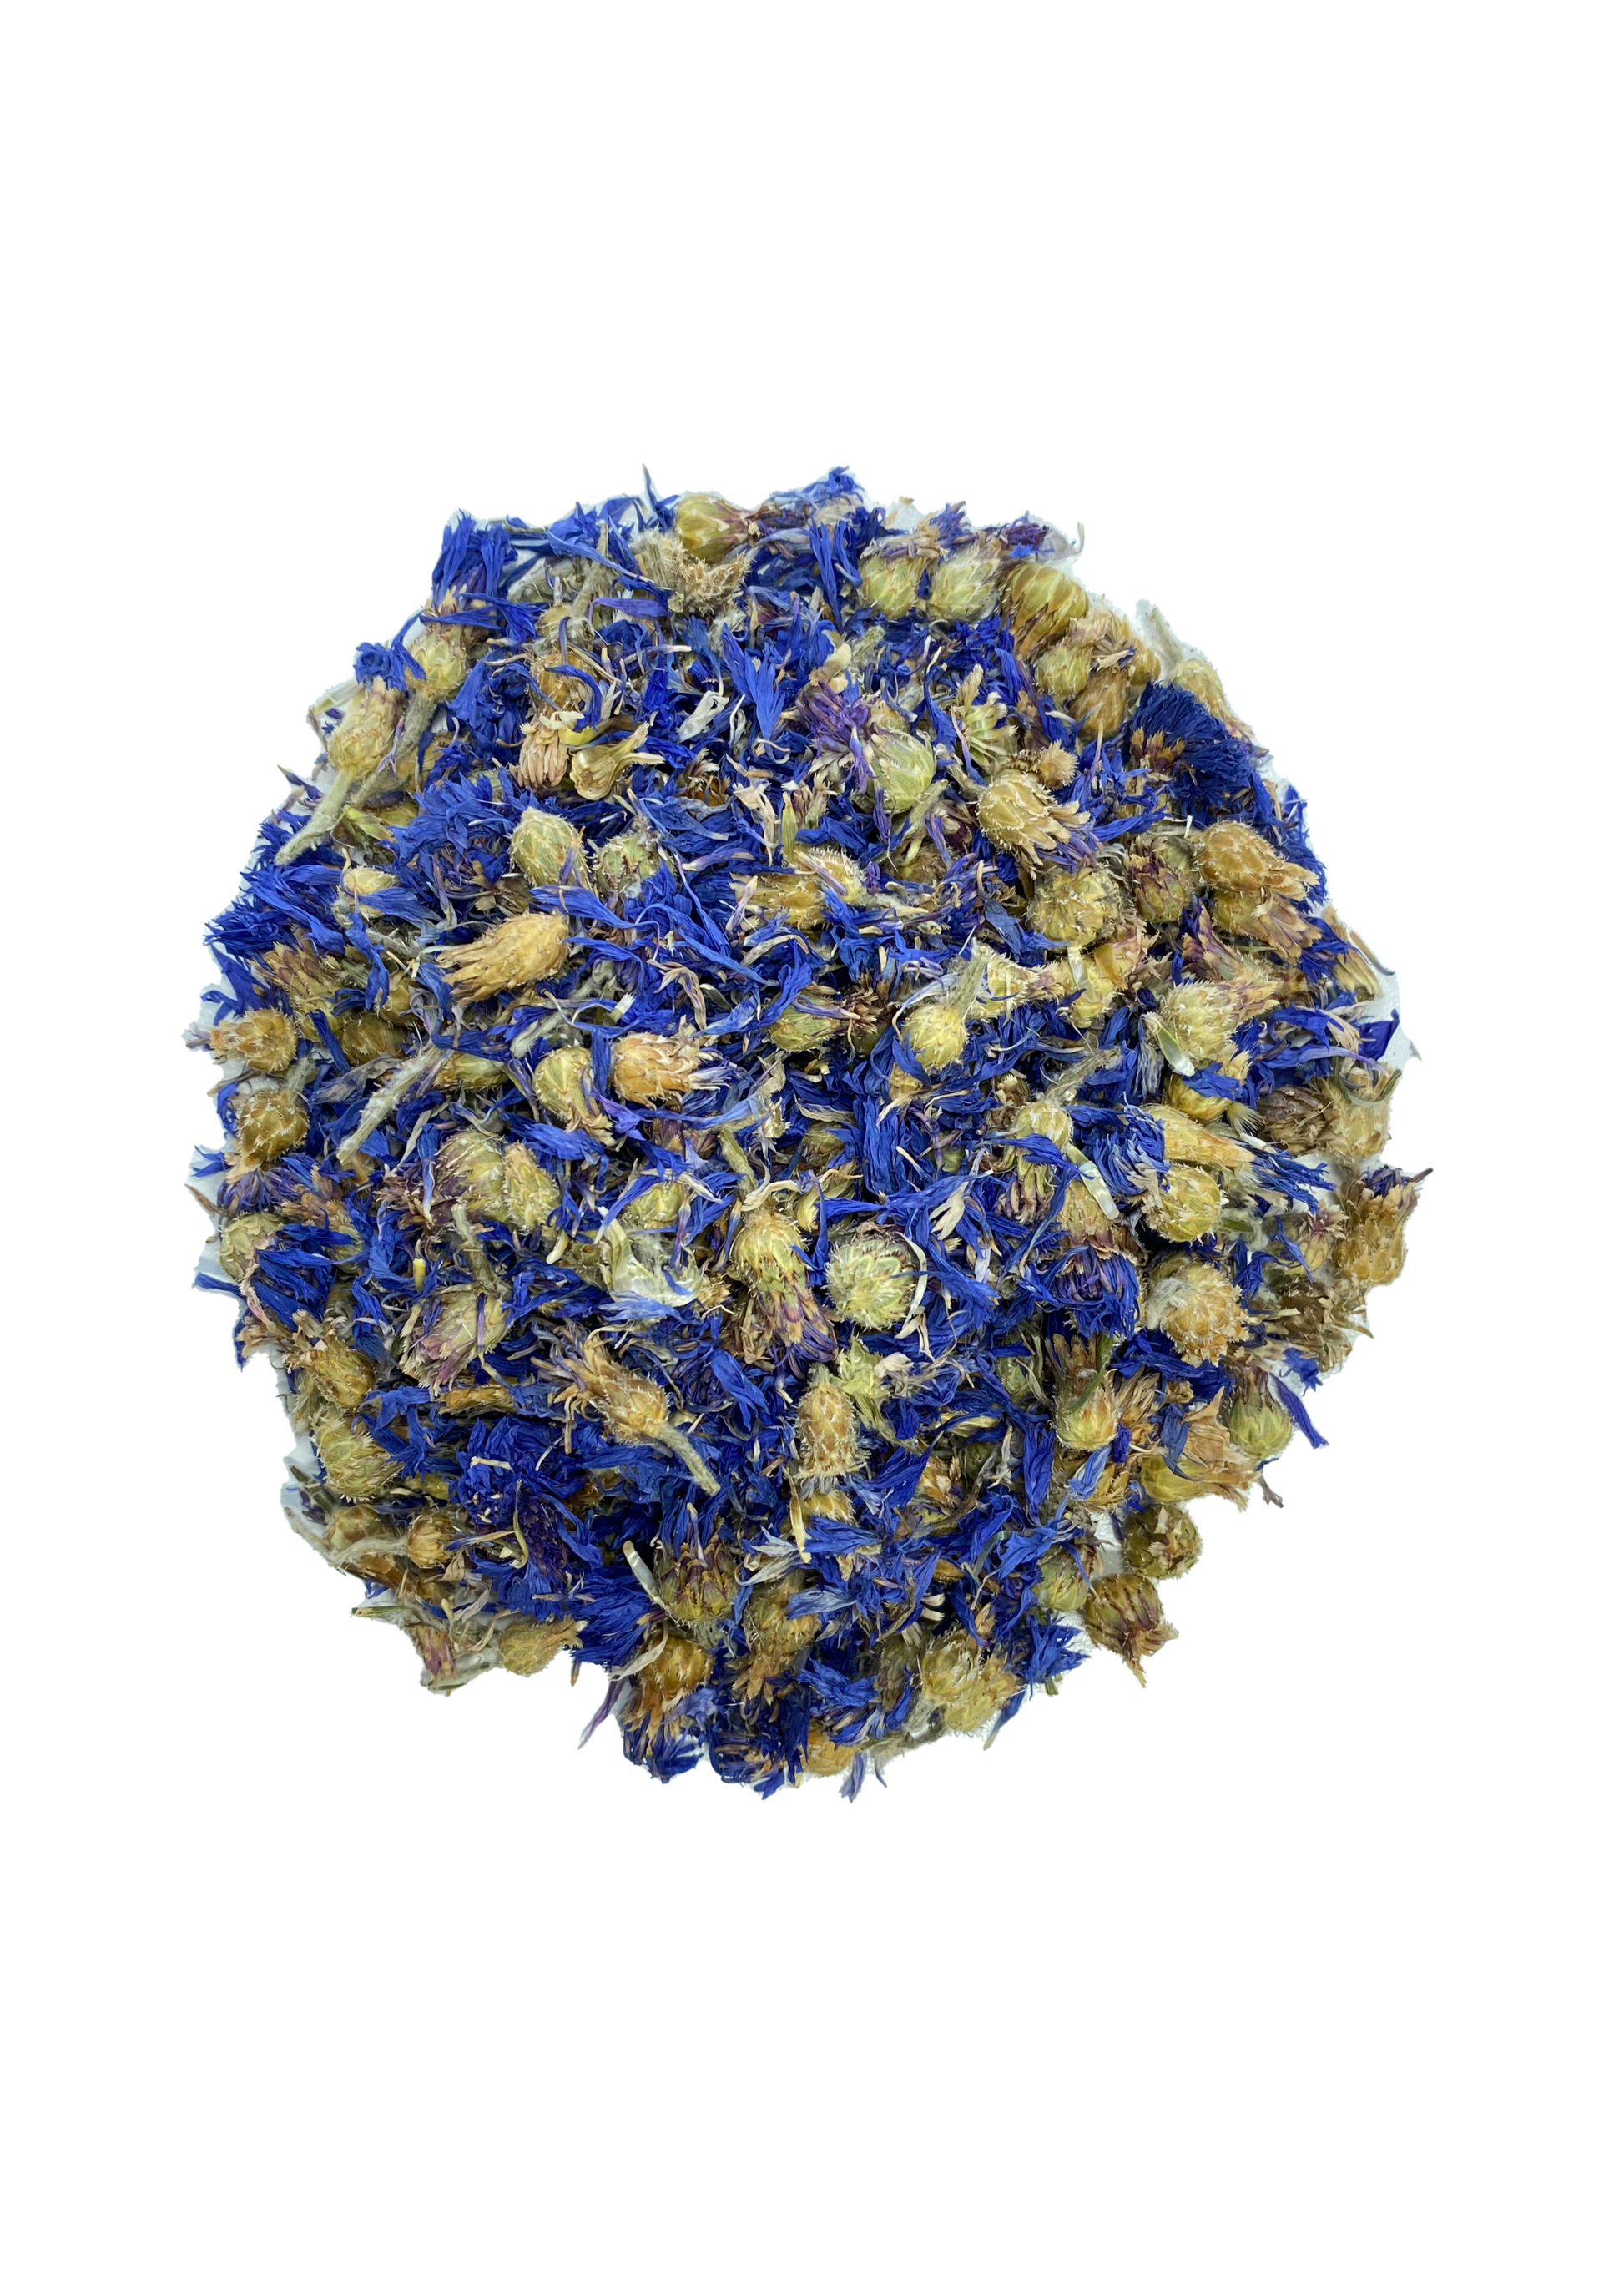 Organic Dried Blue Cornflower Blossoms For Hamsters, Small Animals, Flowers, Forage, Reptile Food, 100g, Whole Flowers, Guinea Pigs Forage. Moony Paw